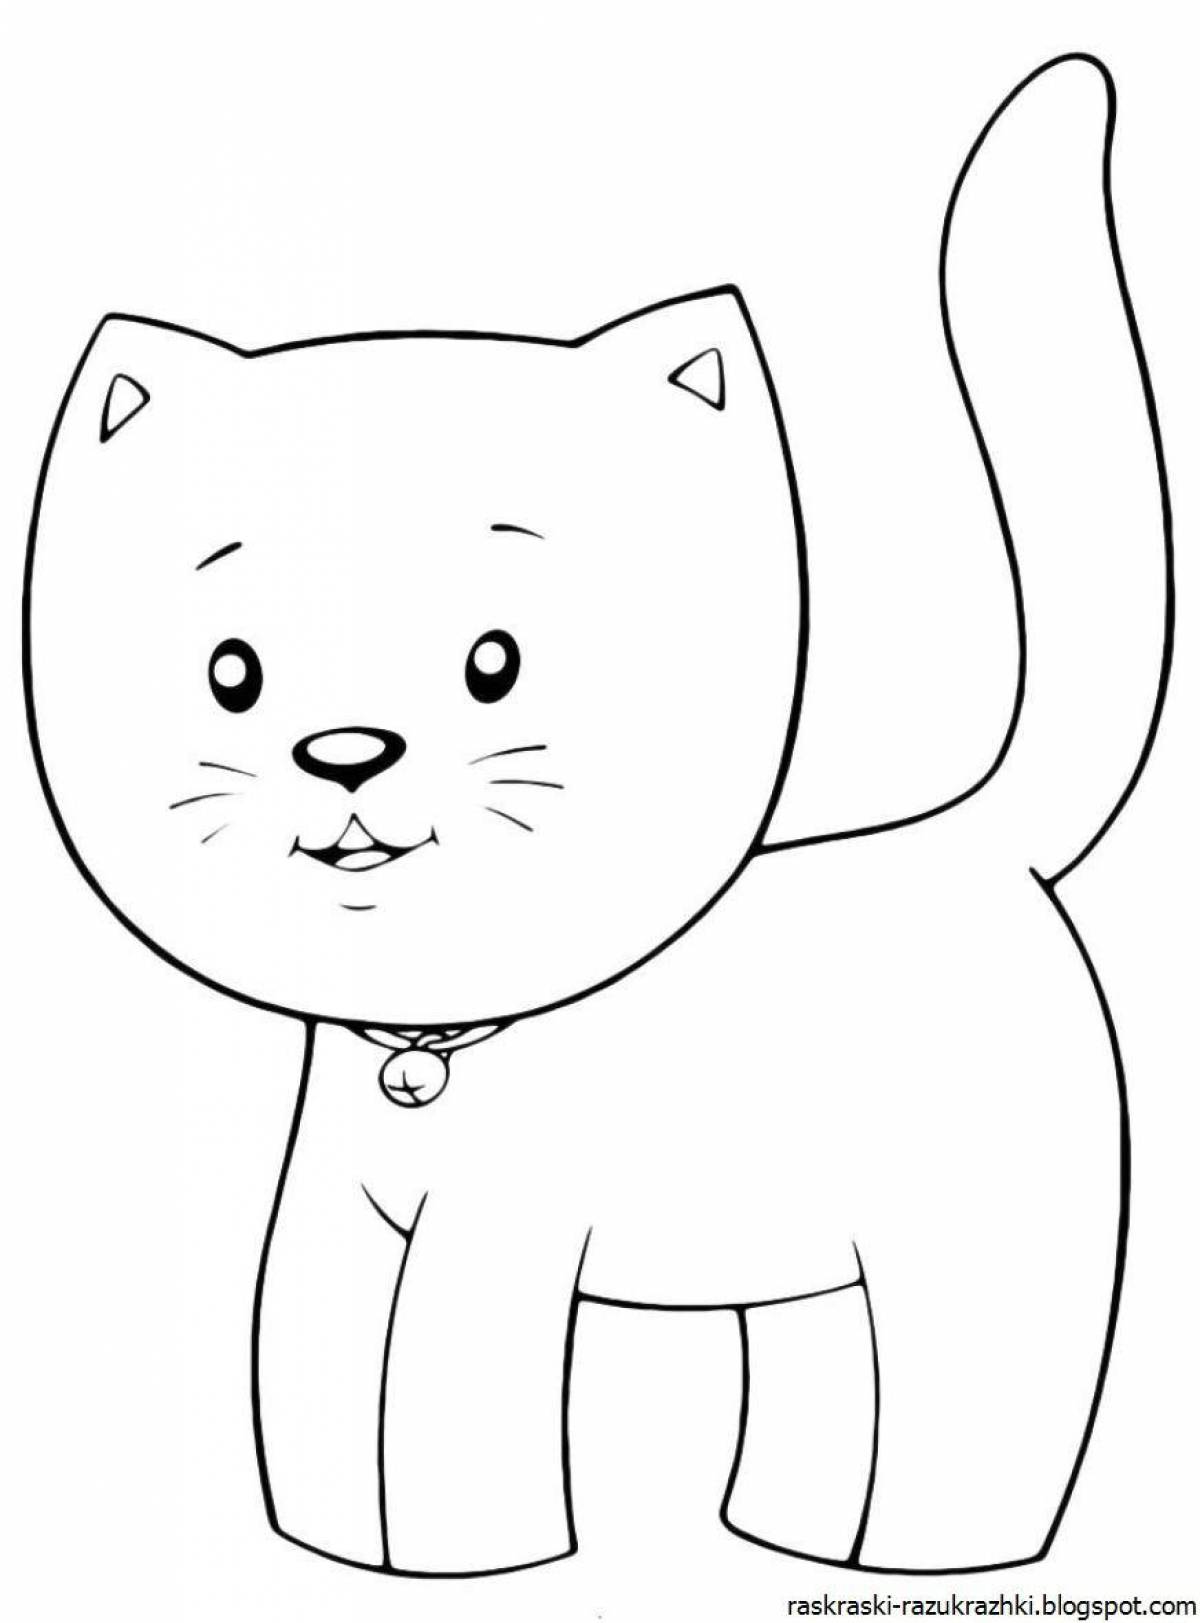 Colorful kitten coloring book for kids